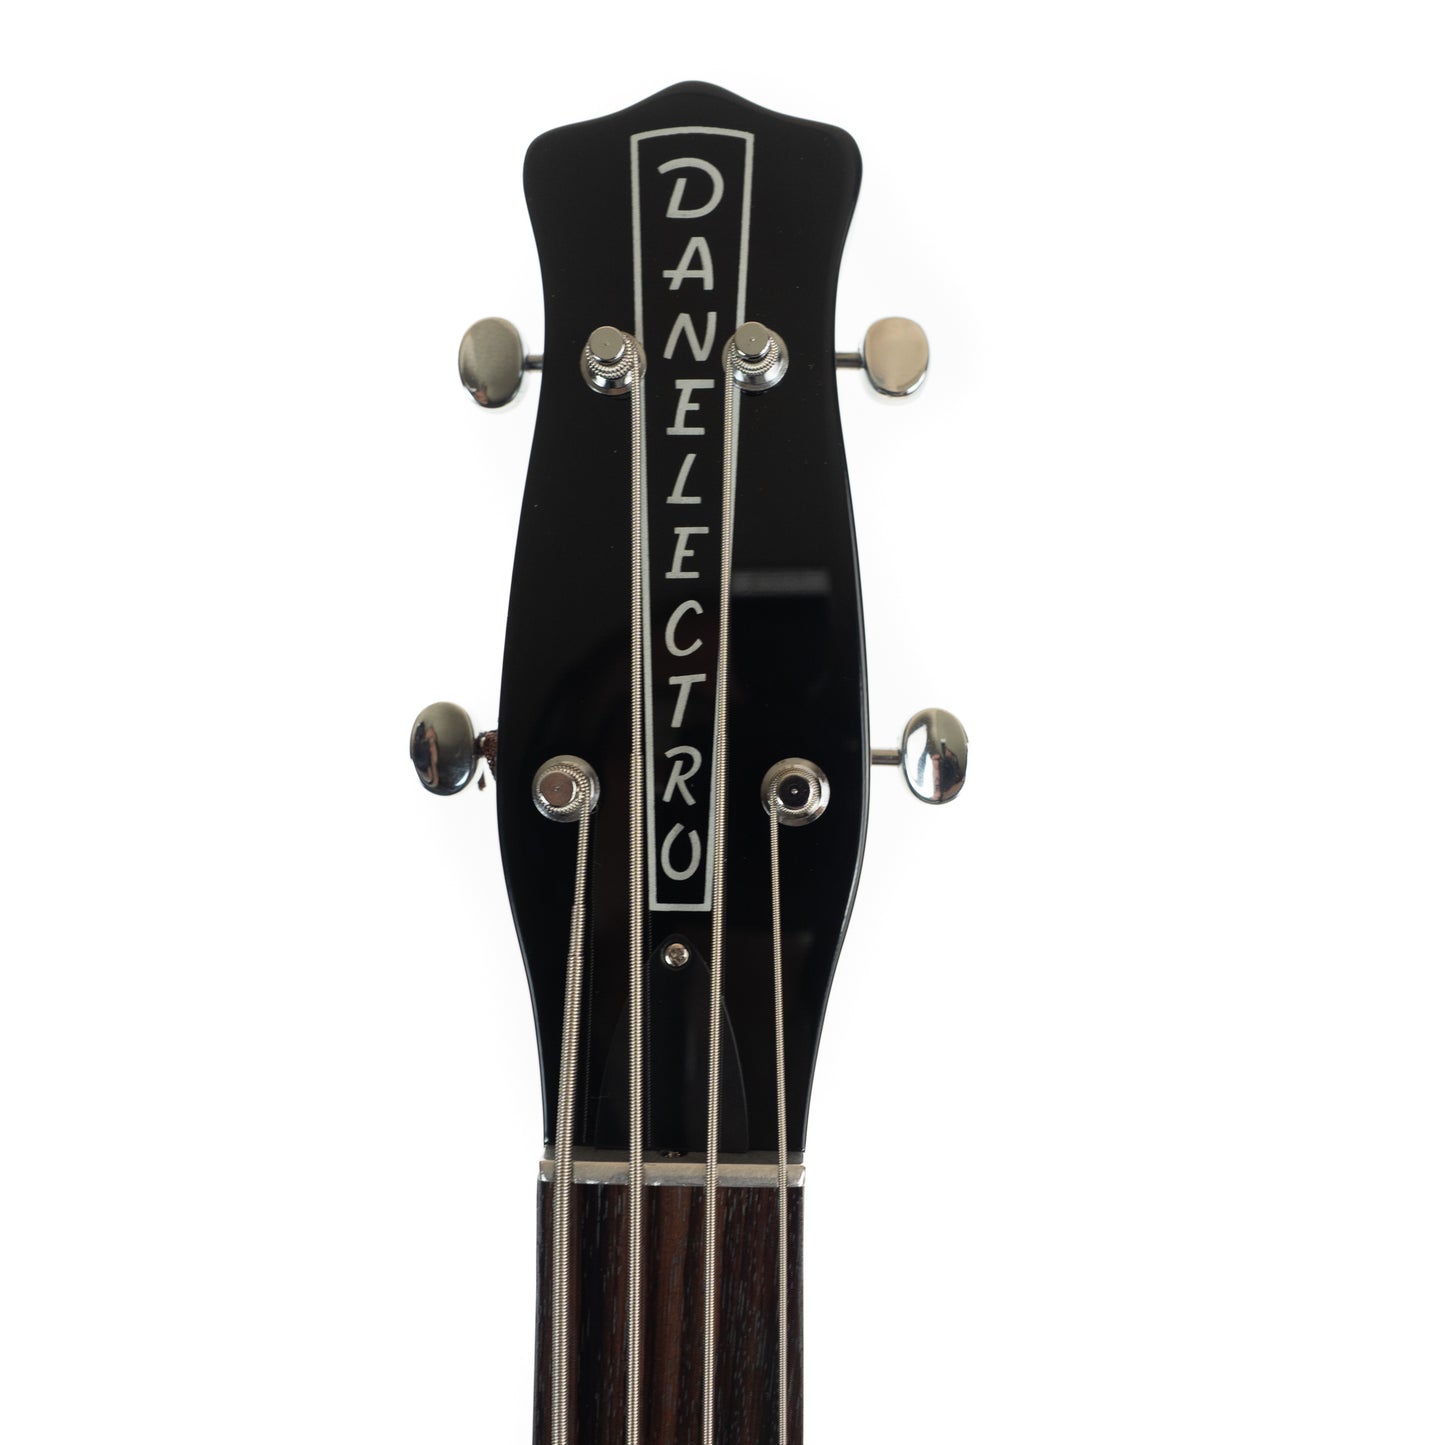 Danelectro D59DC long scale bass electric guitar gloss black - ultra light, only 7lbs!